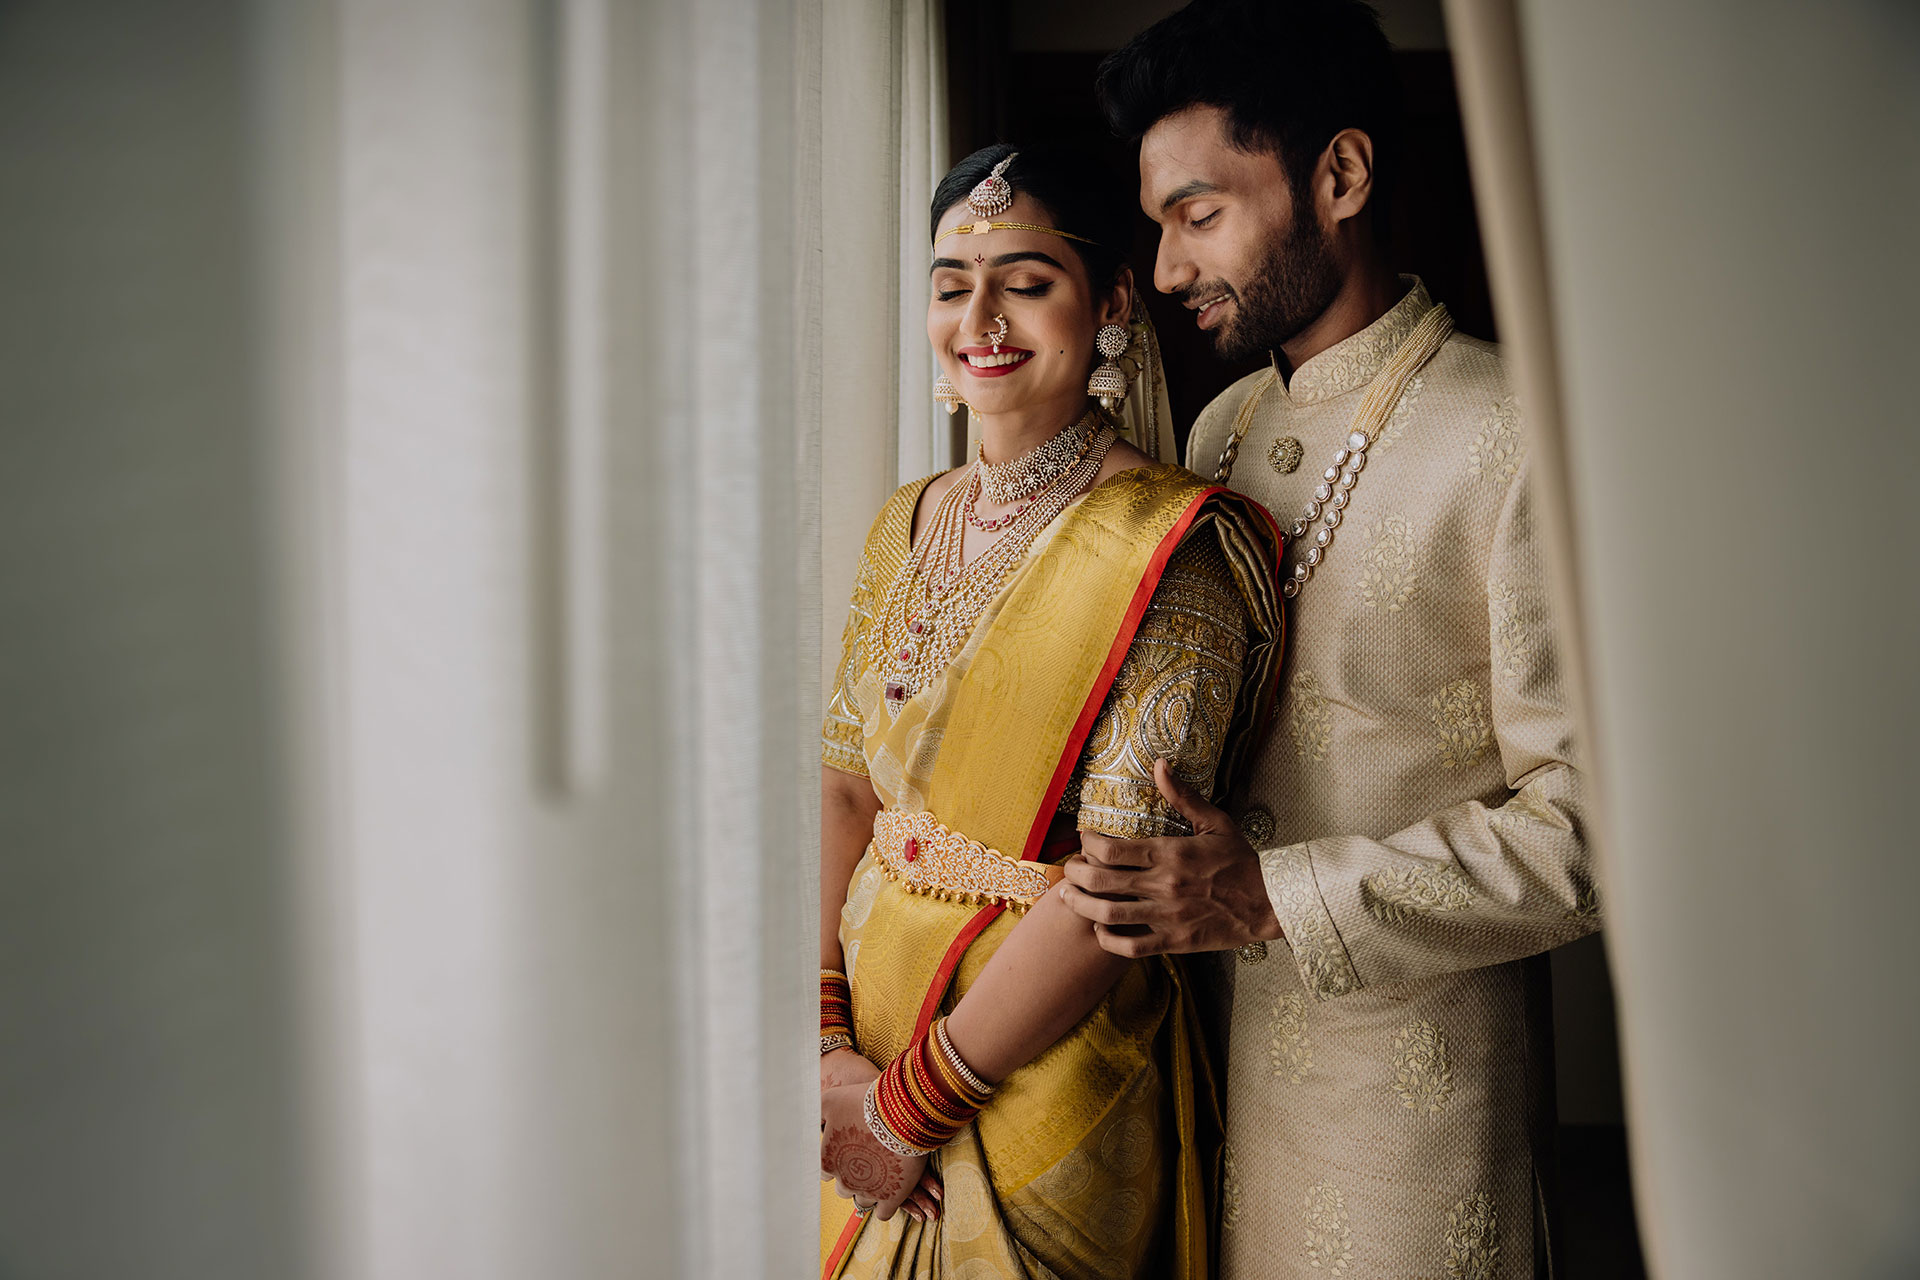 Wedding Aperture | Indian bride photography poses, Indian wedding  photography poses, Indian wedding photography couples